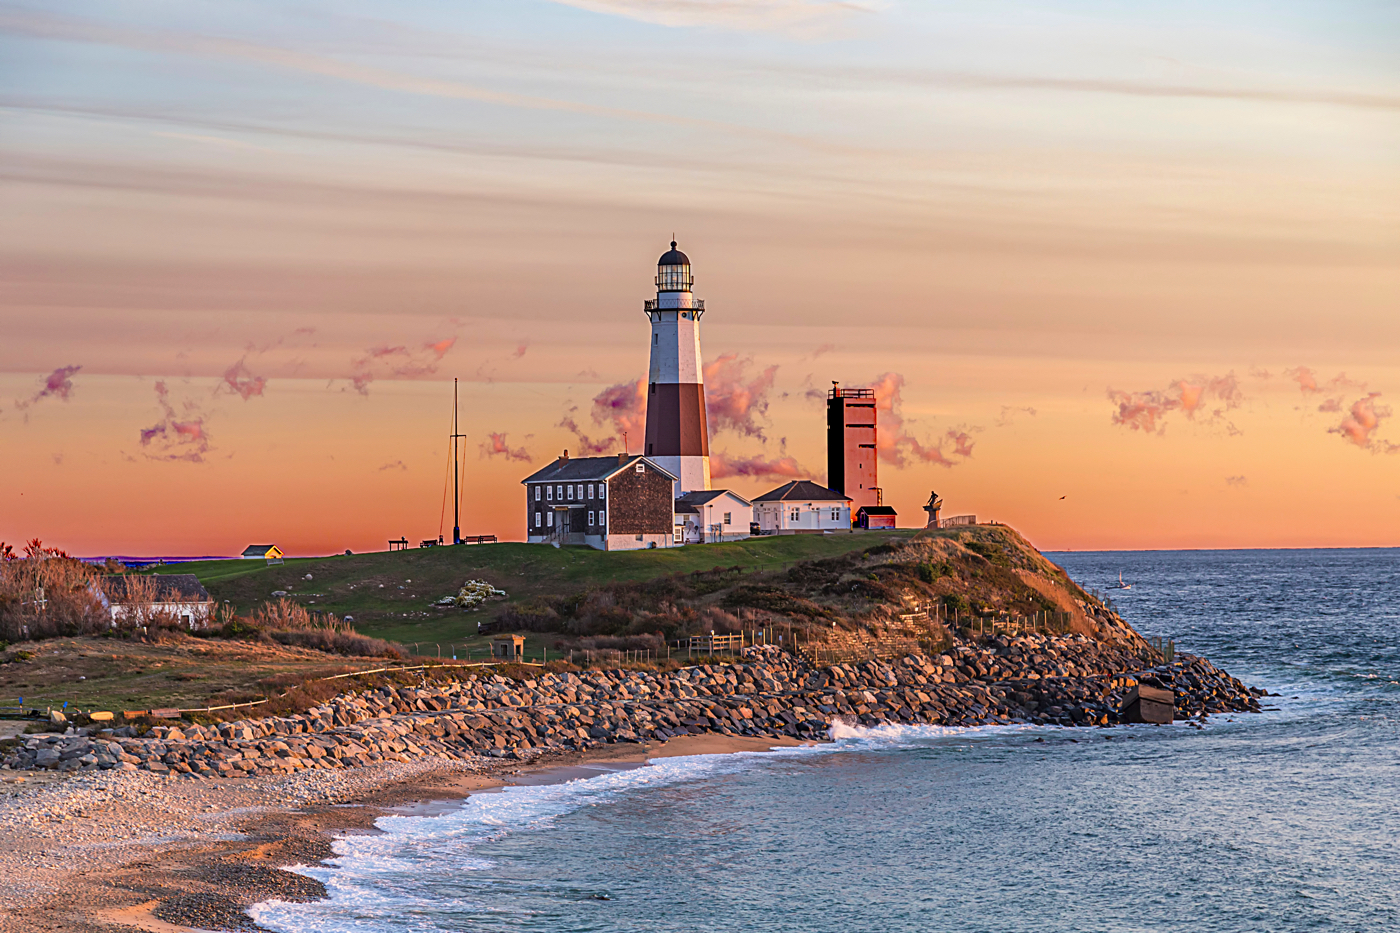 18 PHENOMENAL THINGS TO DO IN MONTAUK YOU'LL LOVE